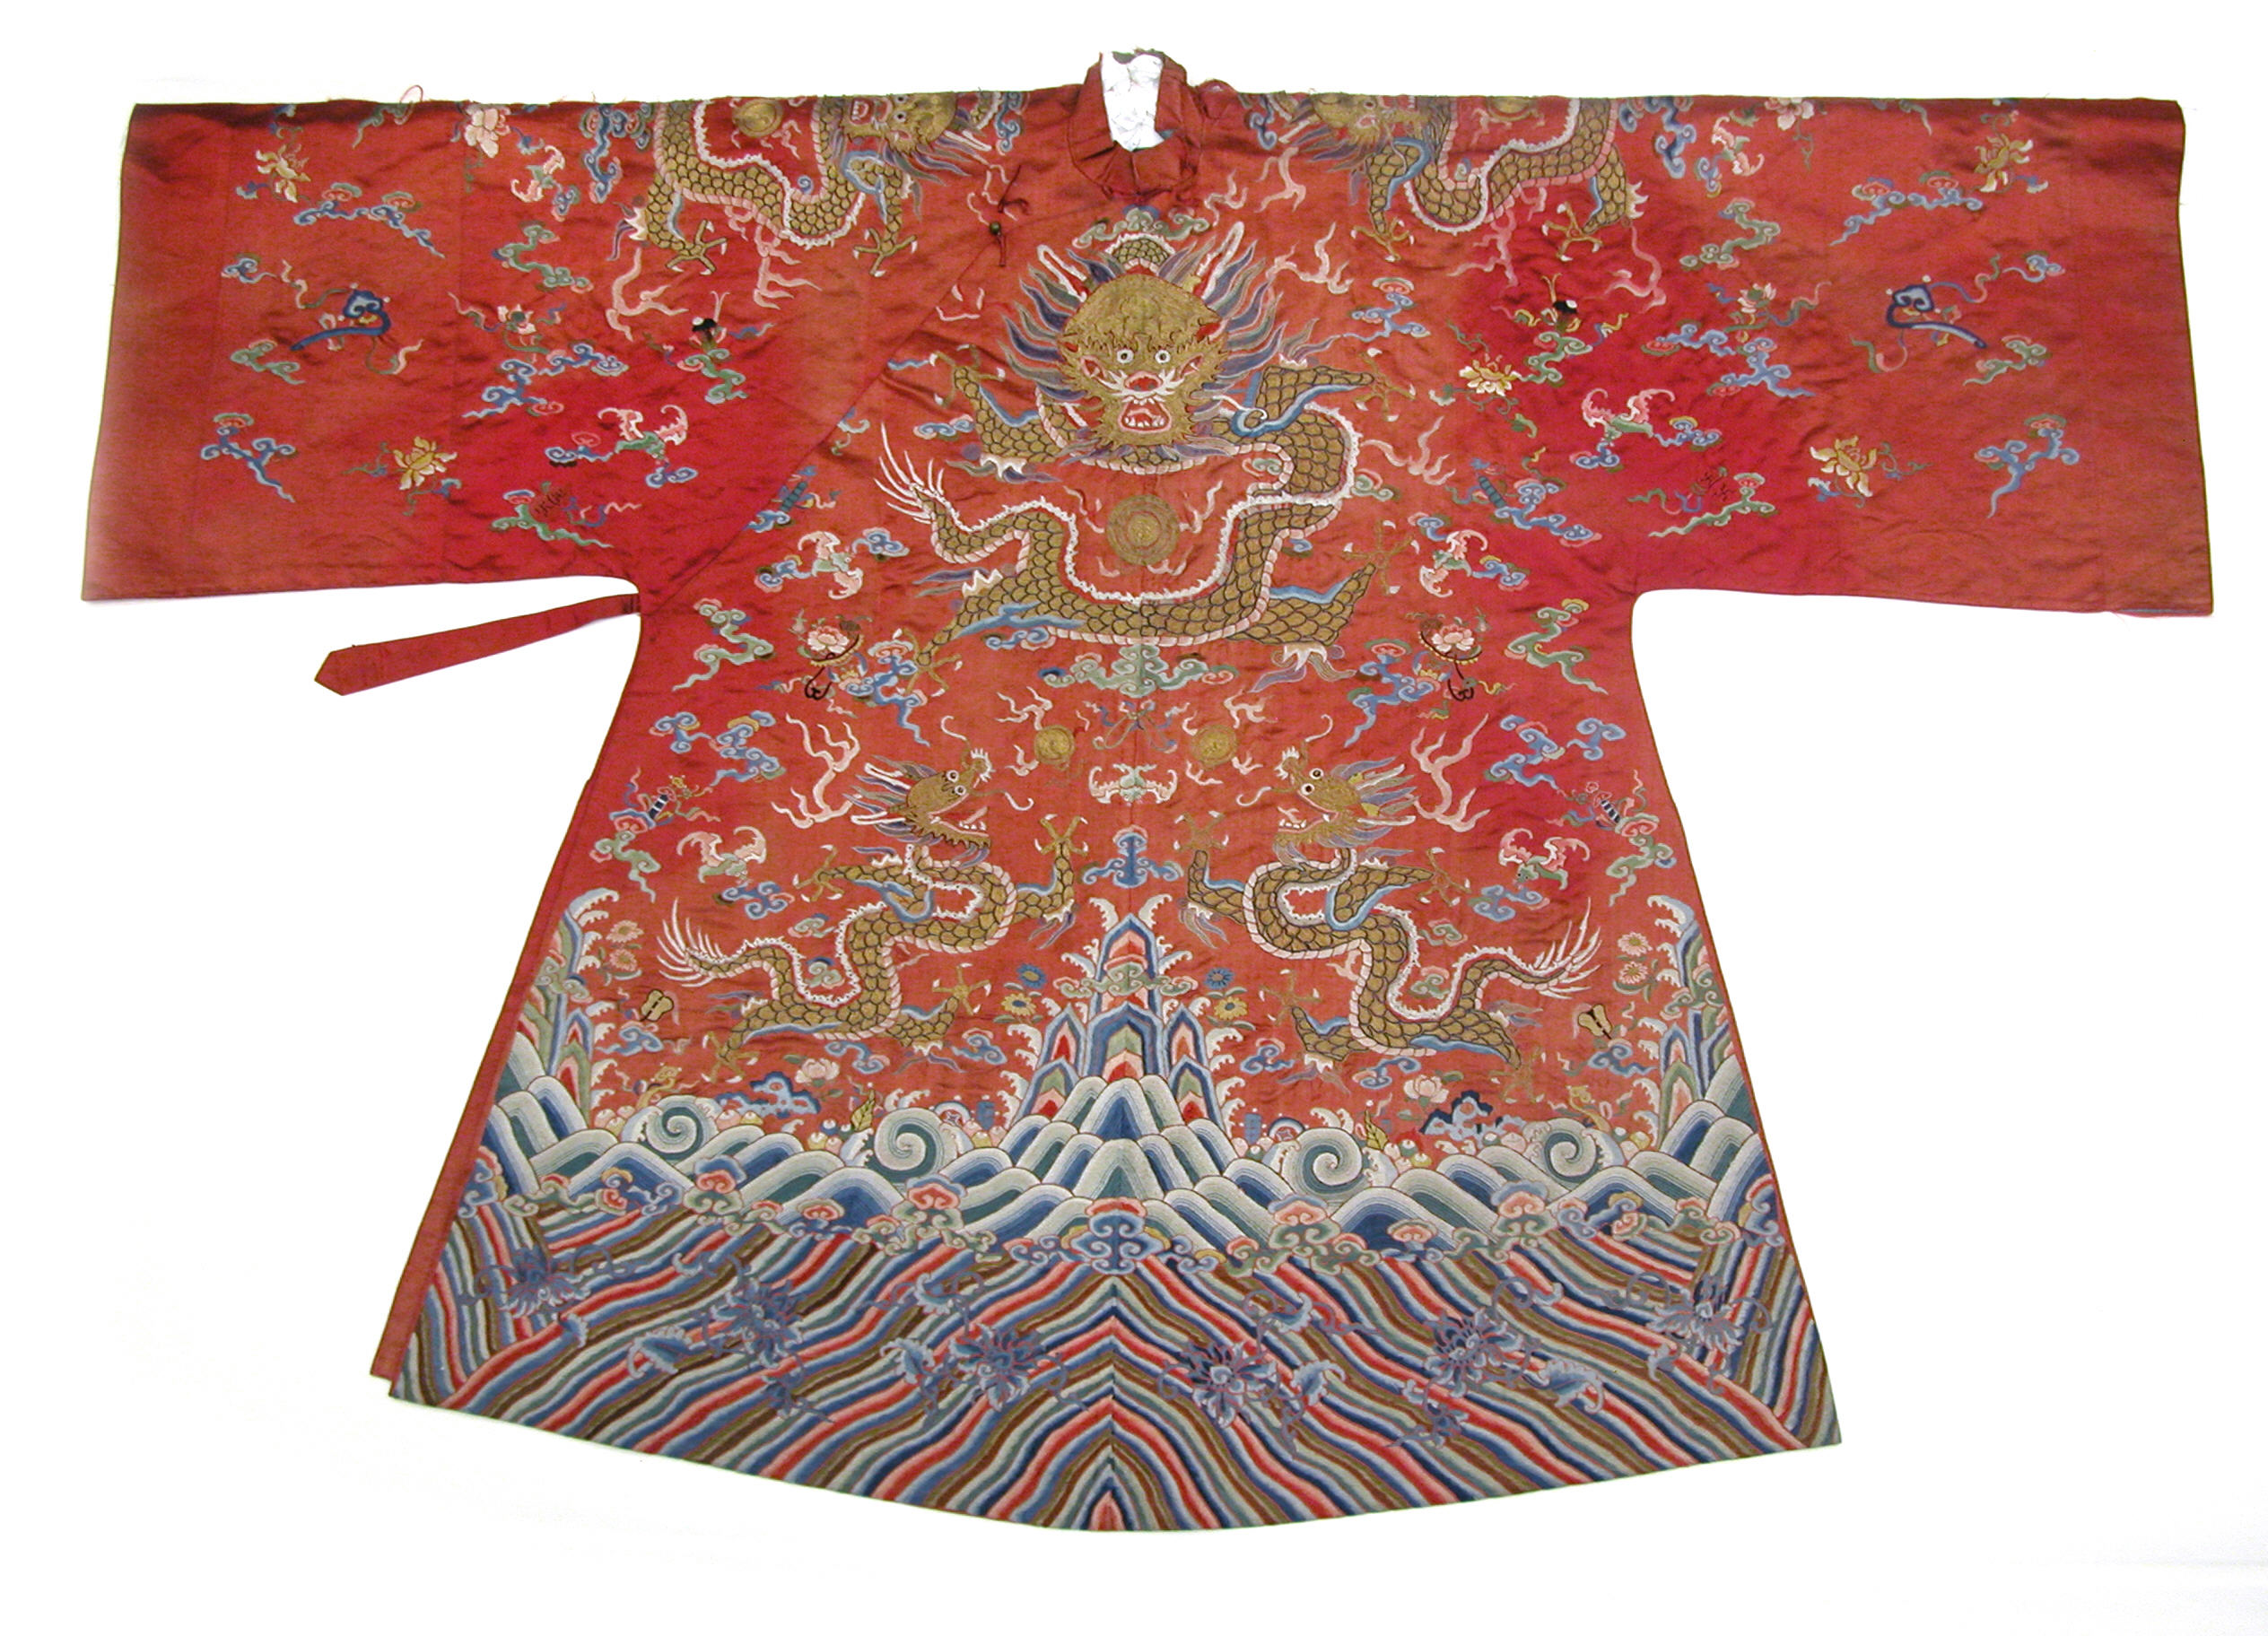 Man or Woman's Jacket, Wedding or Theatrical (?) | China | Qing dynasty ...